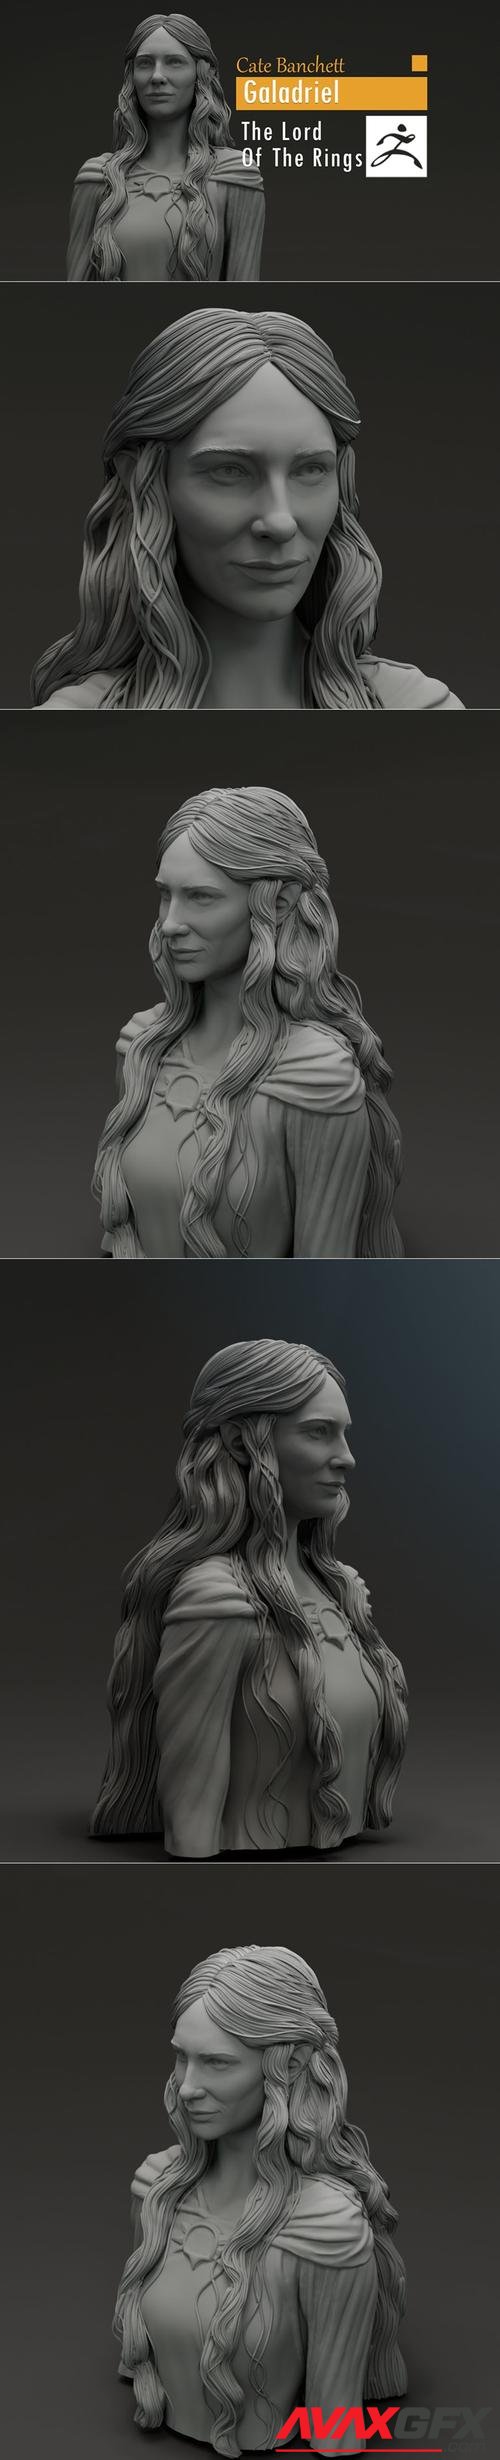 Cate Blanchet - Galadriel - The Lord Of The RIngs – 3D Print